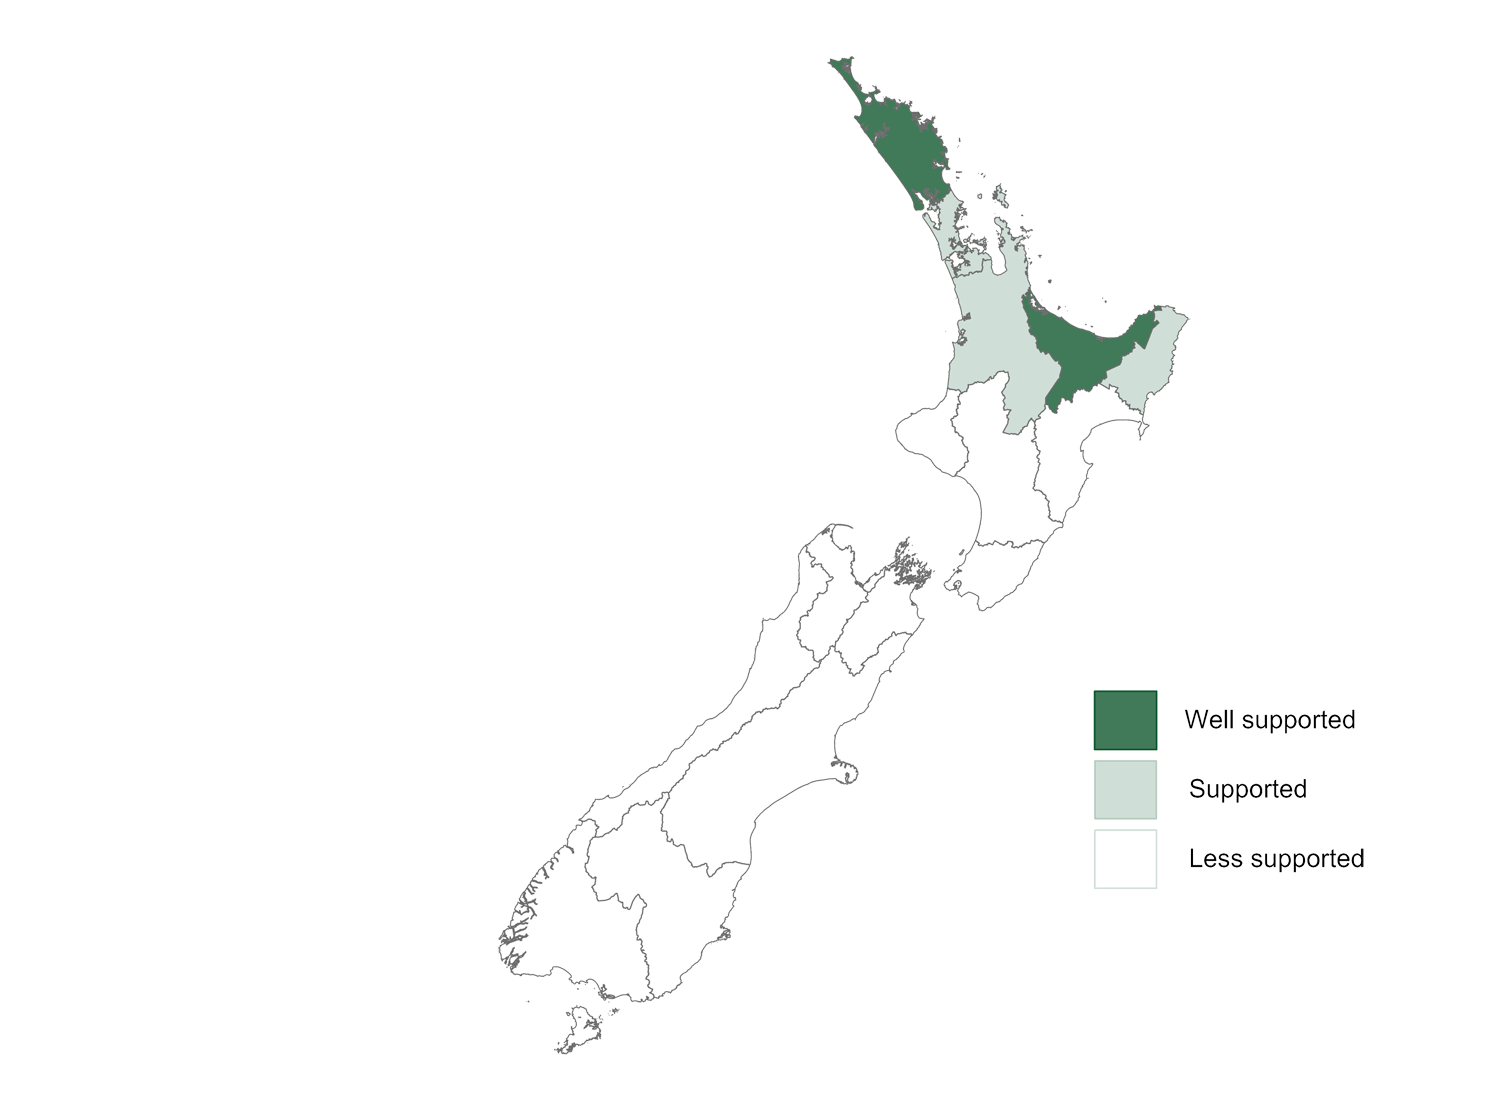 New Zealand map highlighting the best regions for commercial avocado growing.